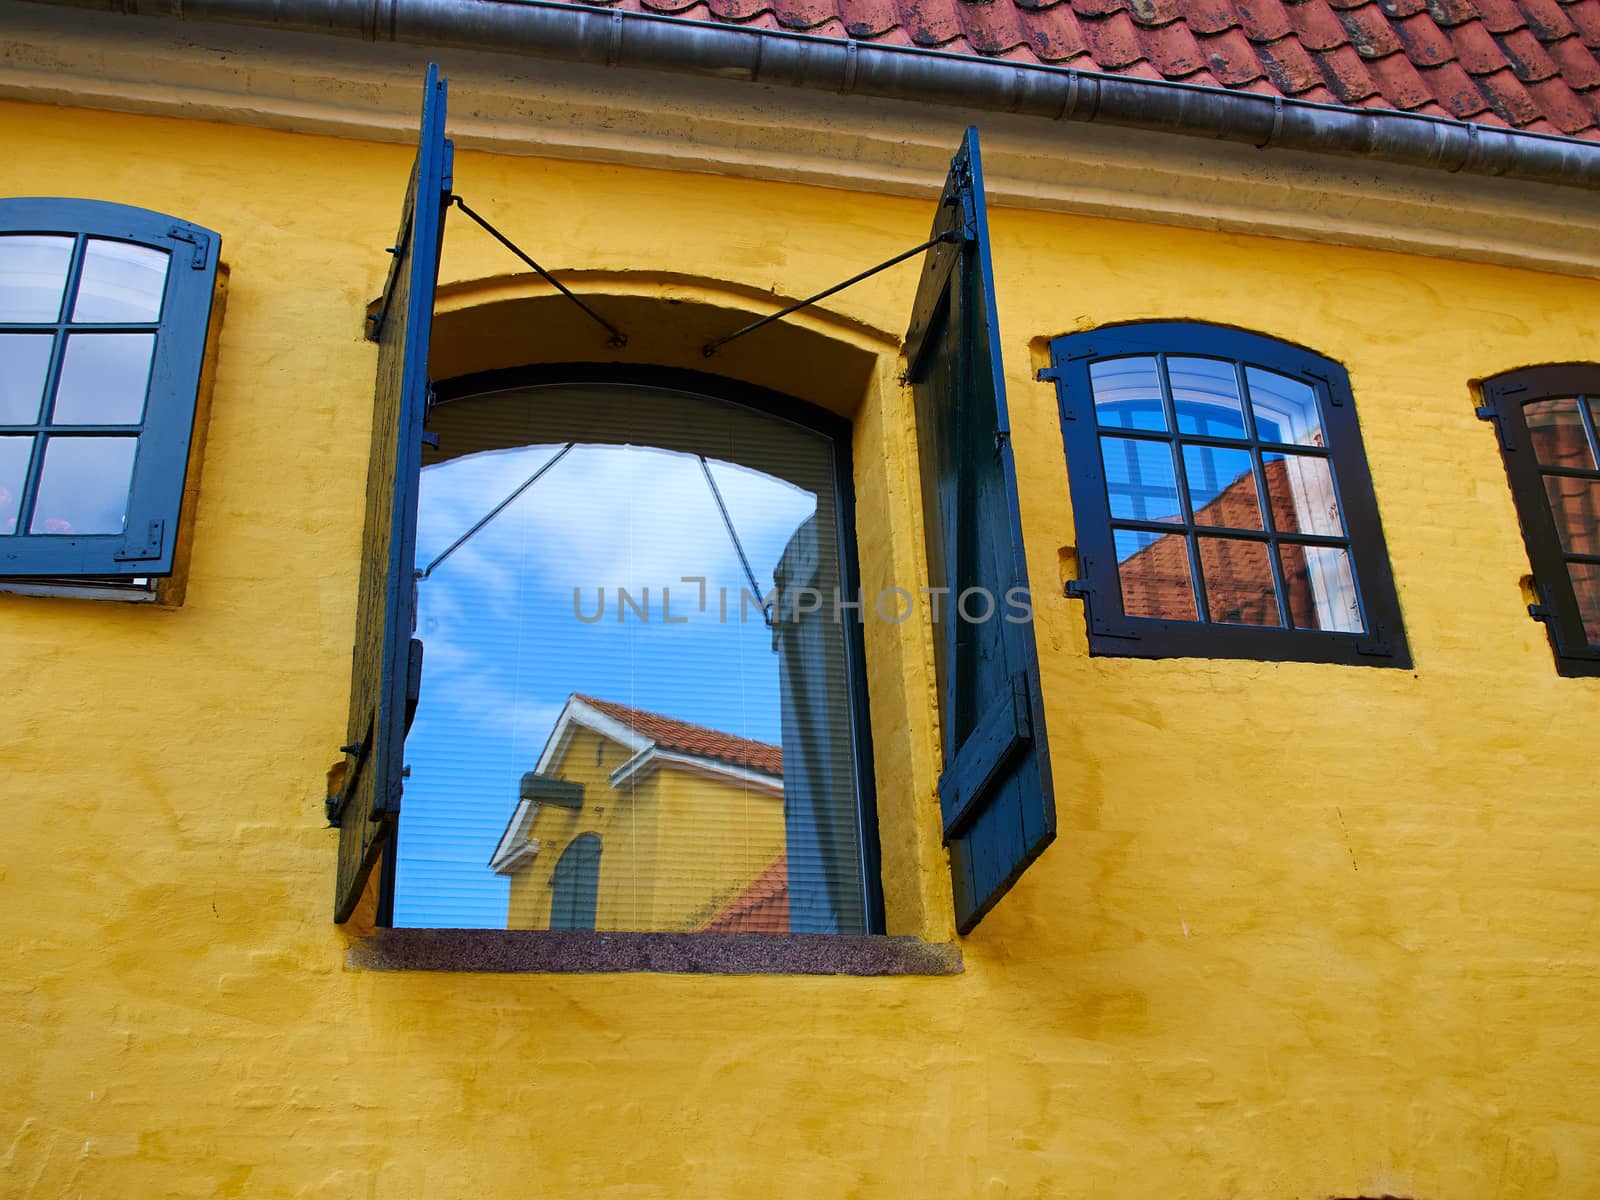 Rustic window with wooden exterior shutters on a yellow painted wall